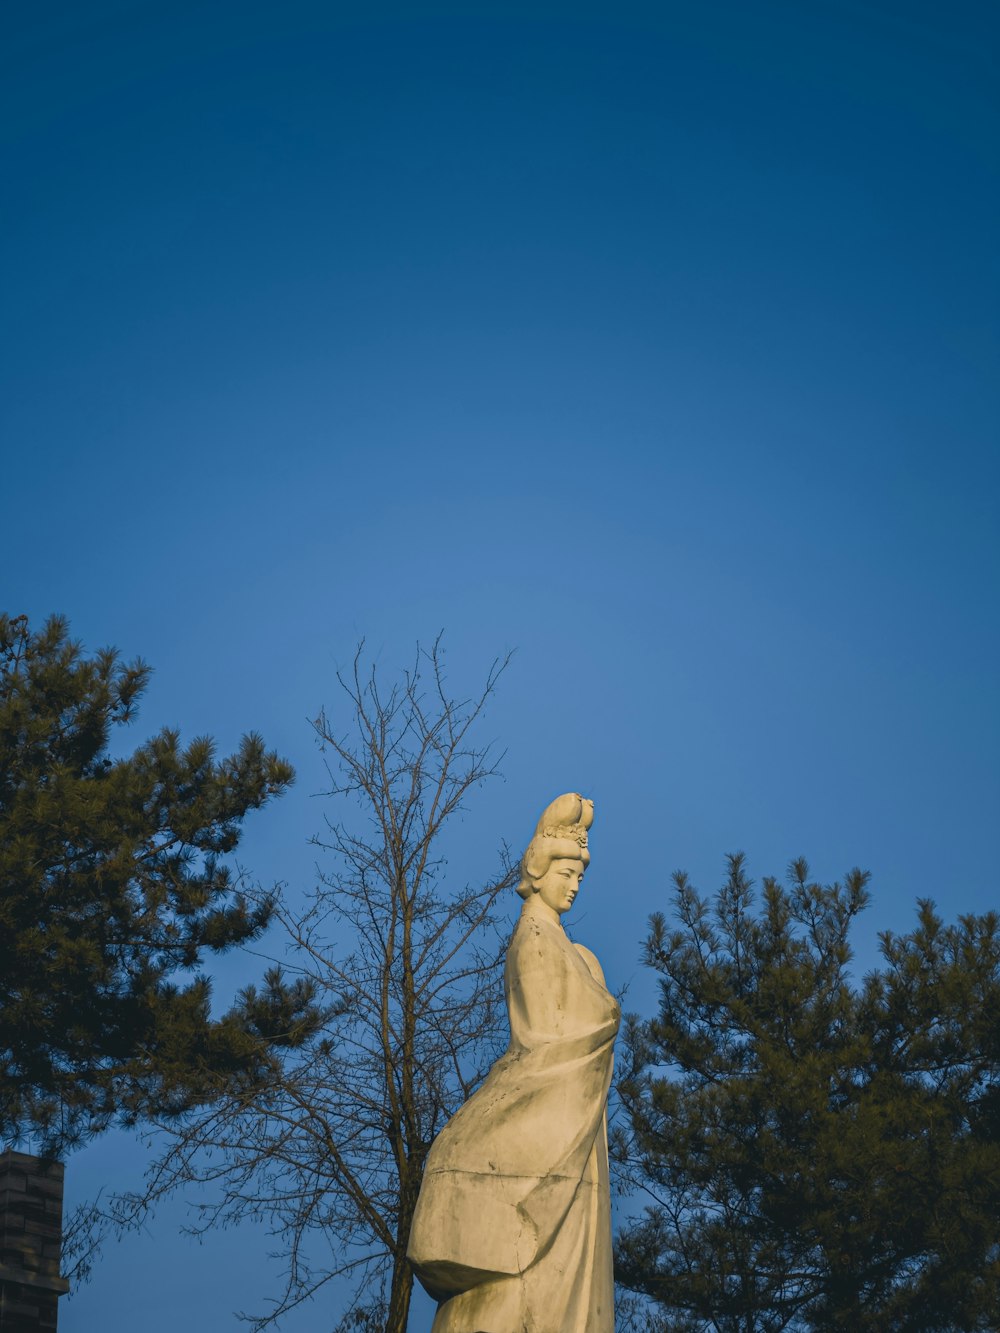 a statue of a person with a tree in the background